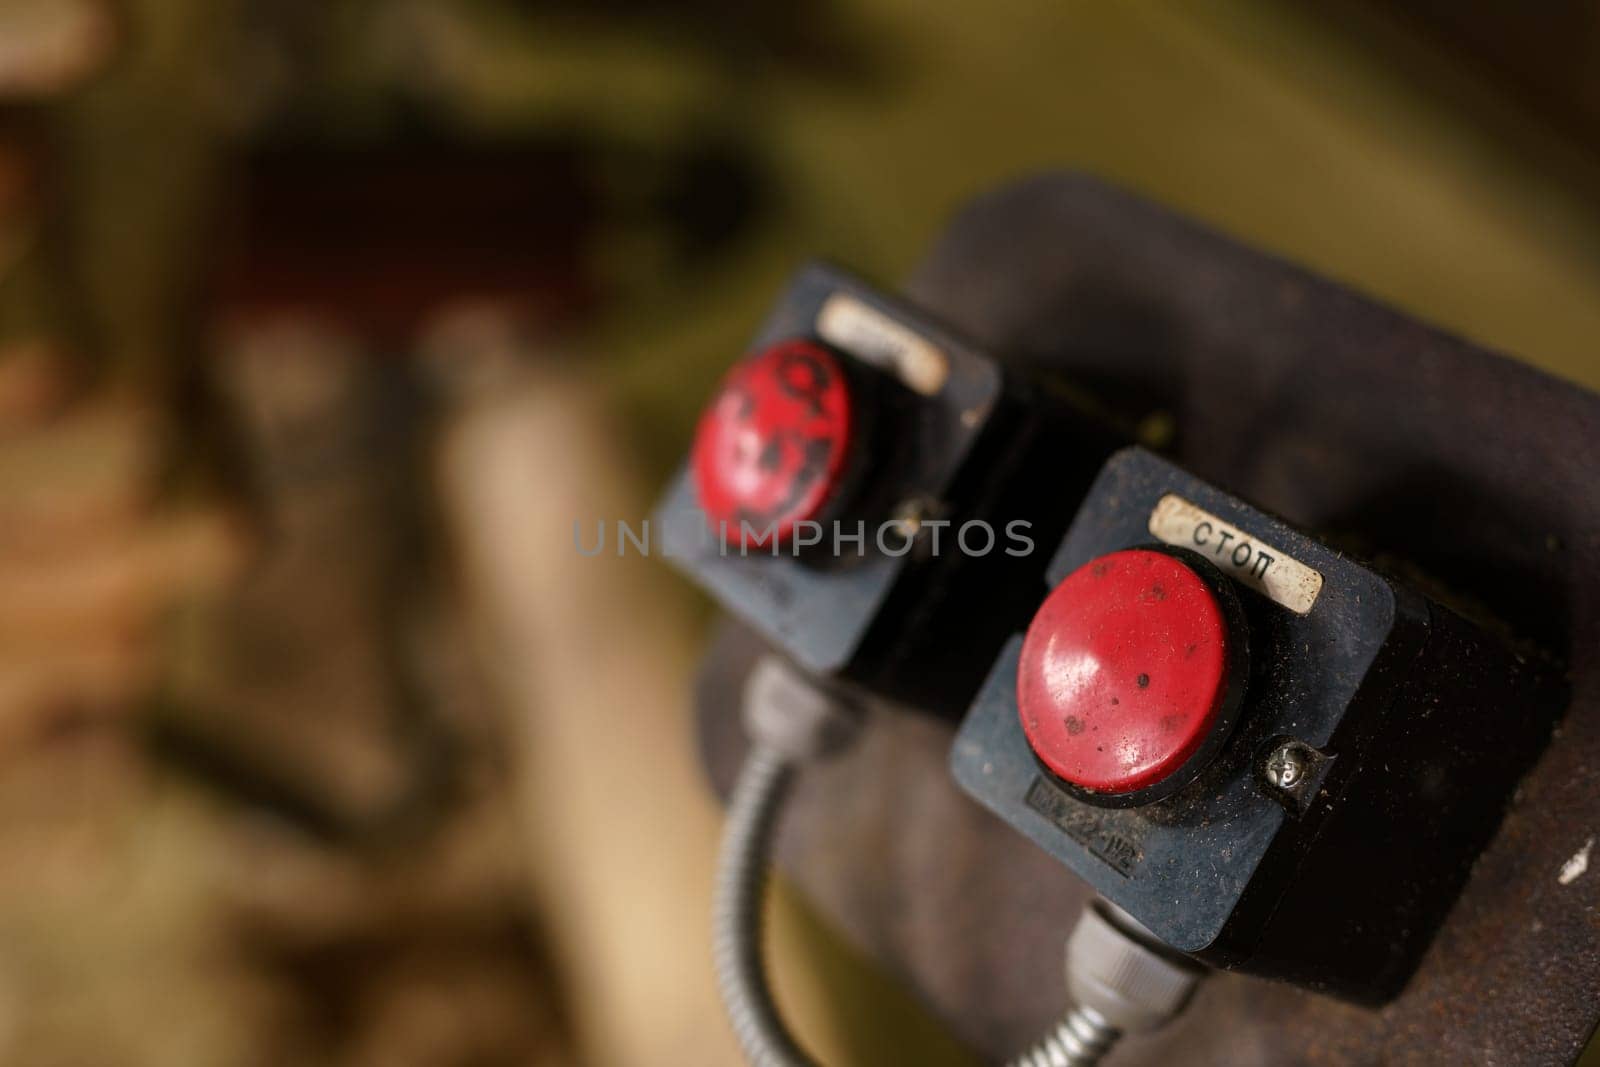 Machine control panel with two red buttons, close-up